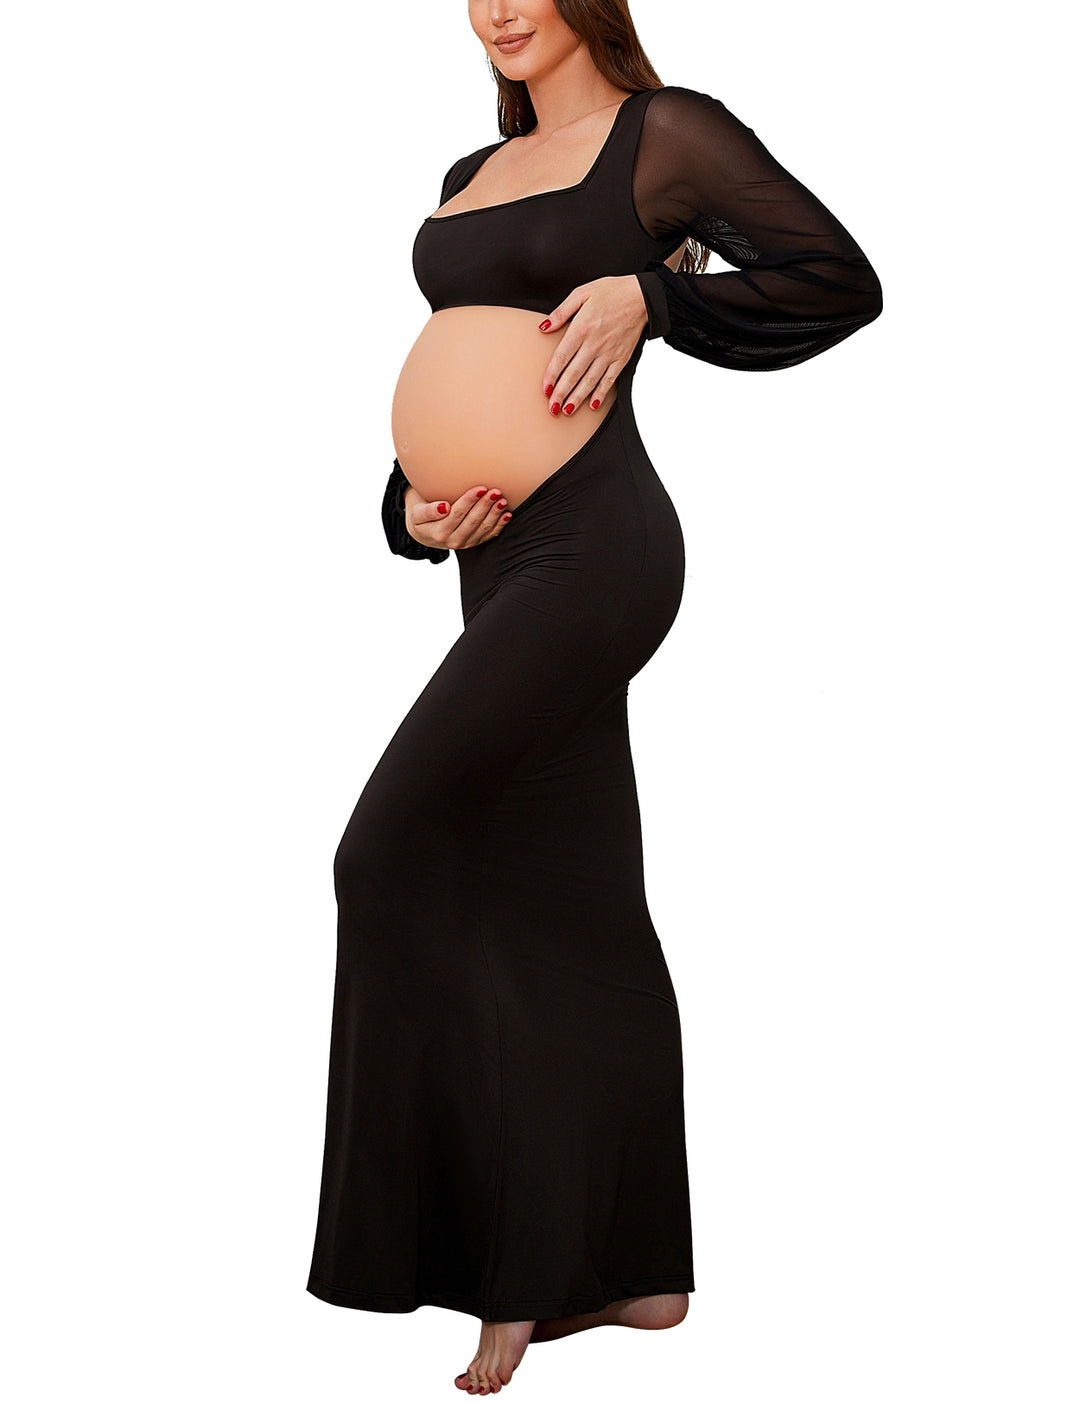 Maternity Dress for Photoshoot Mesh Long Sleeve Cut-Out Backless Maternity Gown